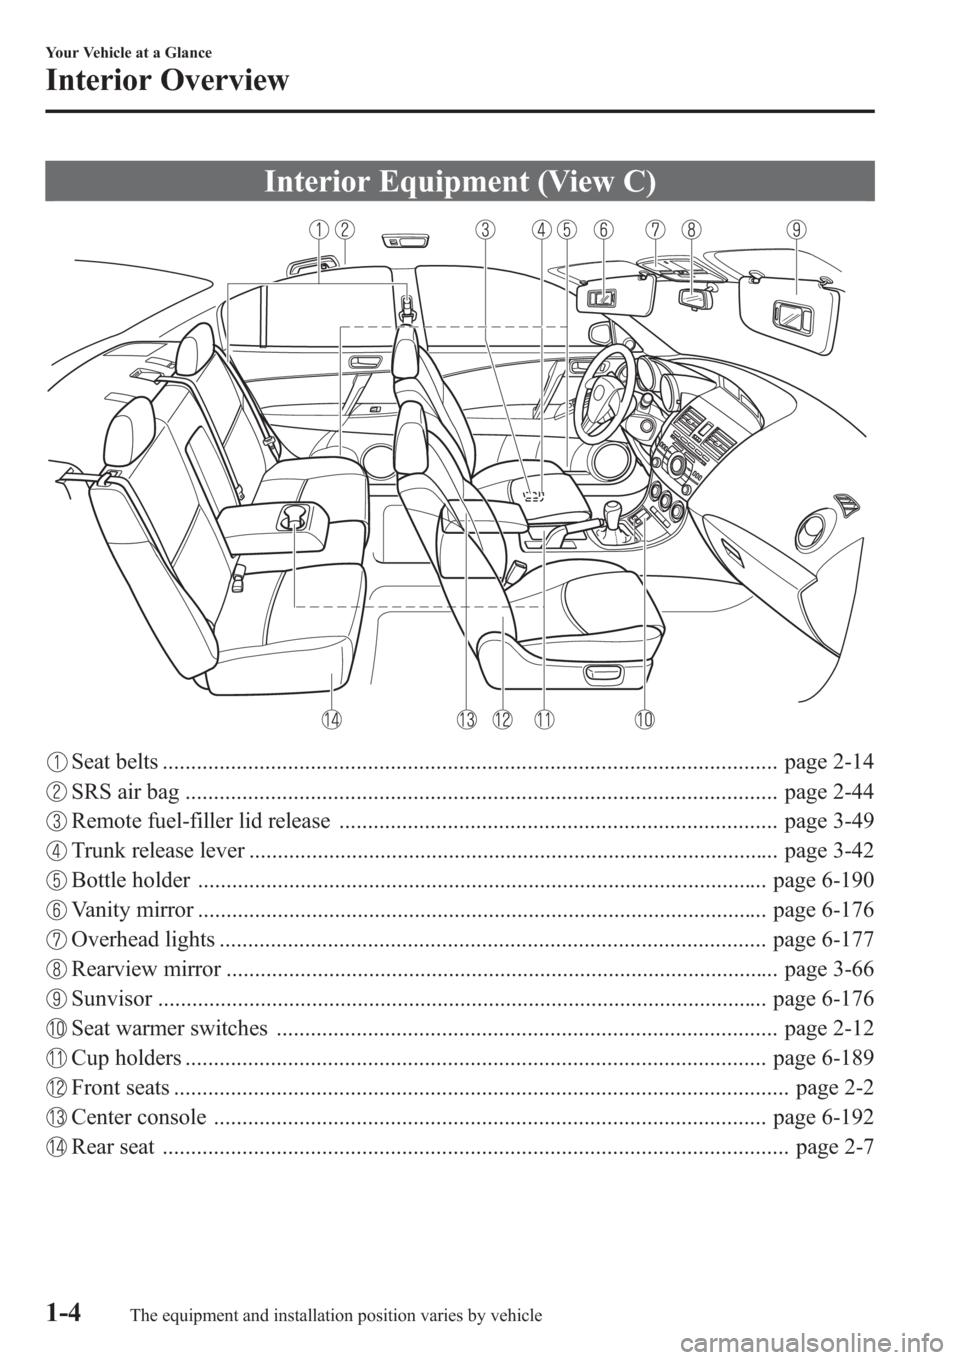 MAZDA MODEL 3 HATCHBACK 2013   (in English) User Guide Interior Equipment (View C)
Seat belts ............................................................................................................ page 2-14
SRS air bag ..............................